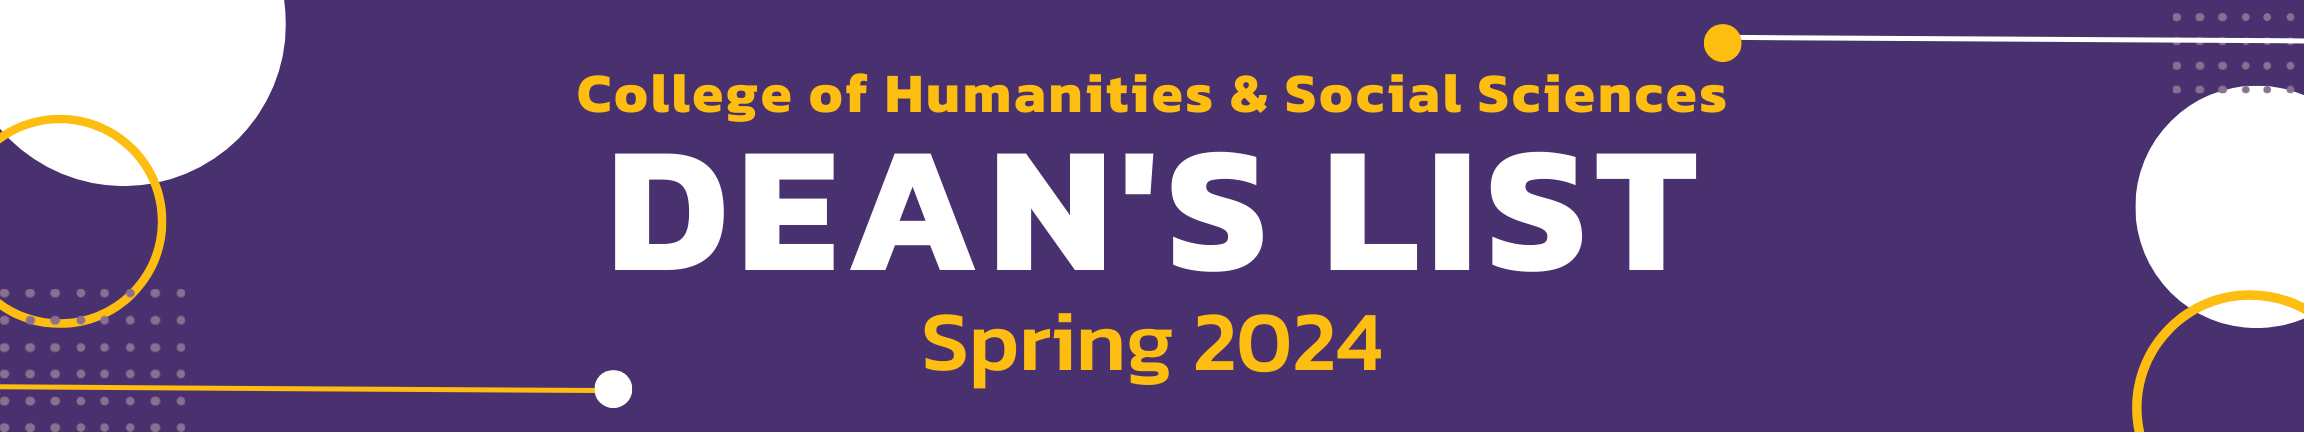 College of Humanities & Social Science Spring 2024 Dean's List header image